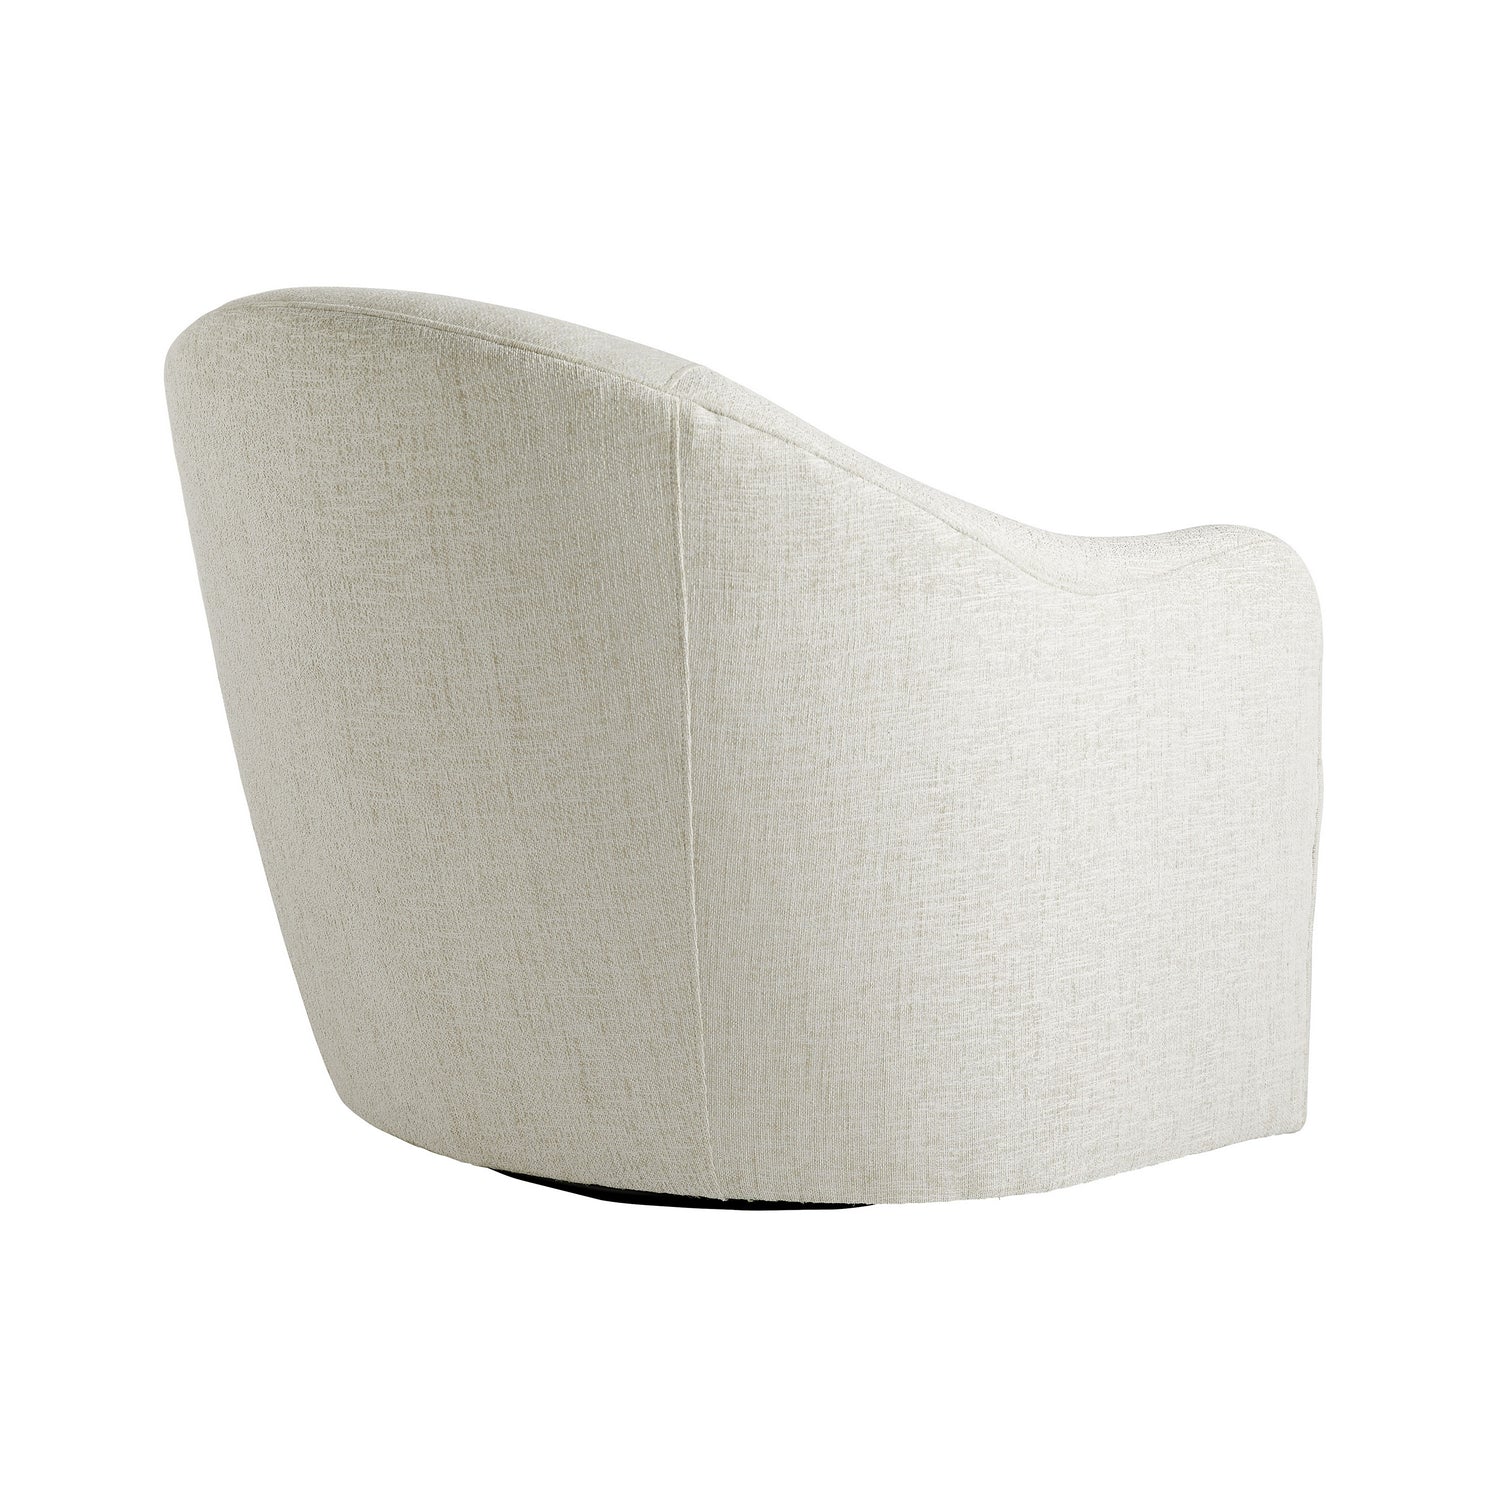 Lounge Chair from the Delfino collection in Frost finish